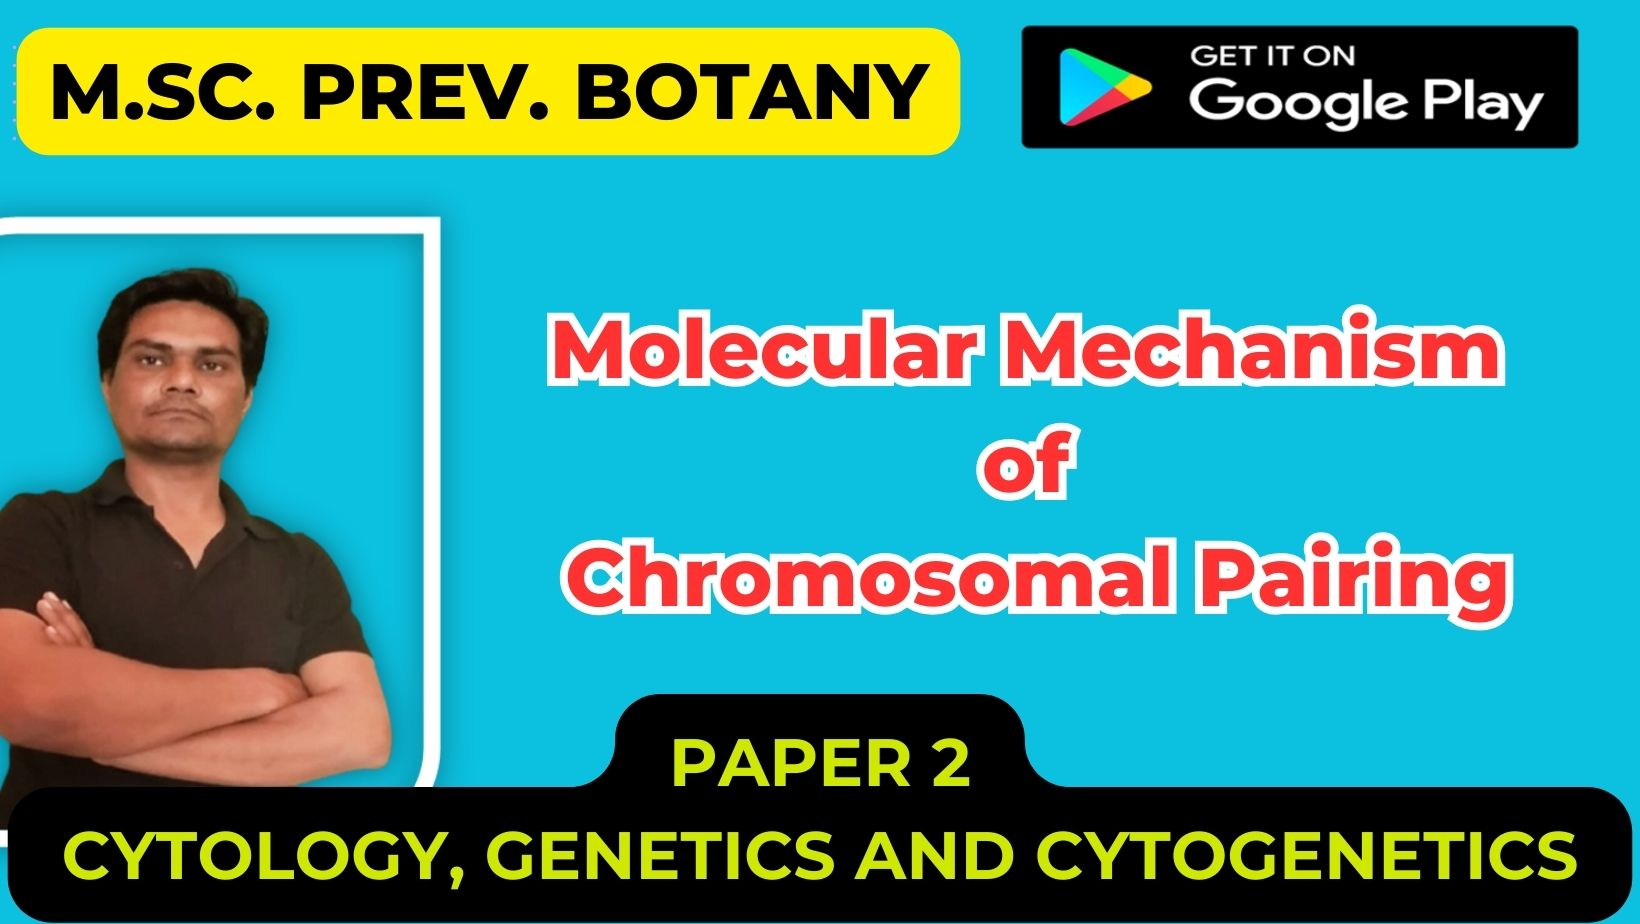 You are currently viewing Molecular Mechanism of Chromosomal Pairing